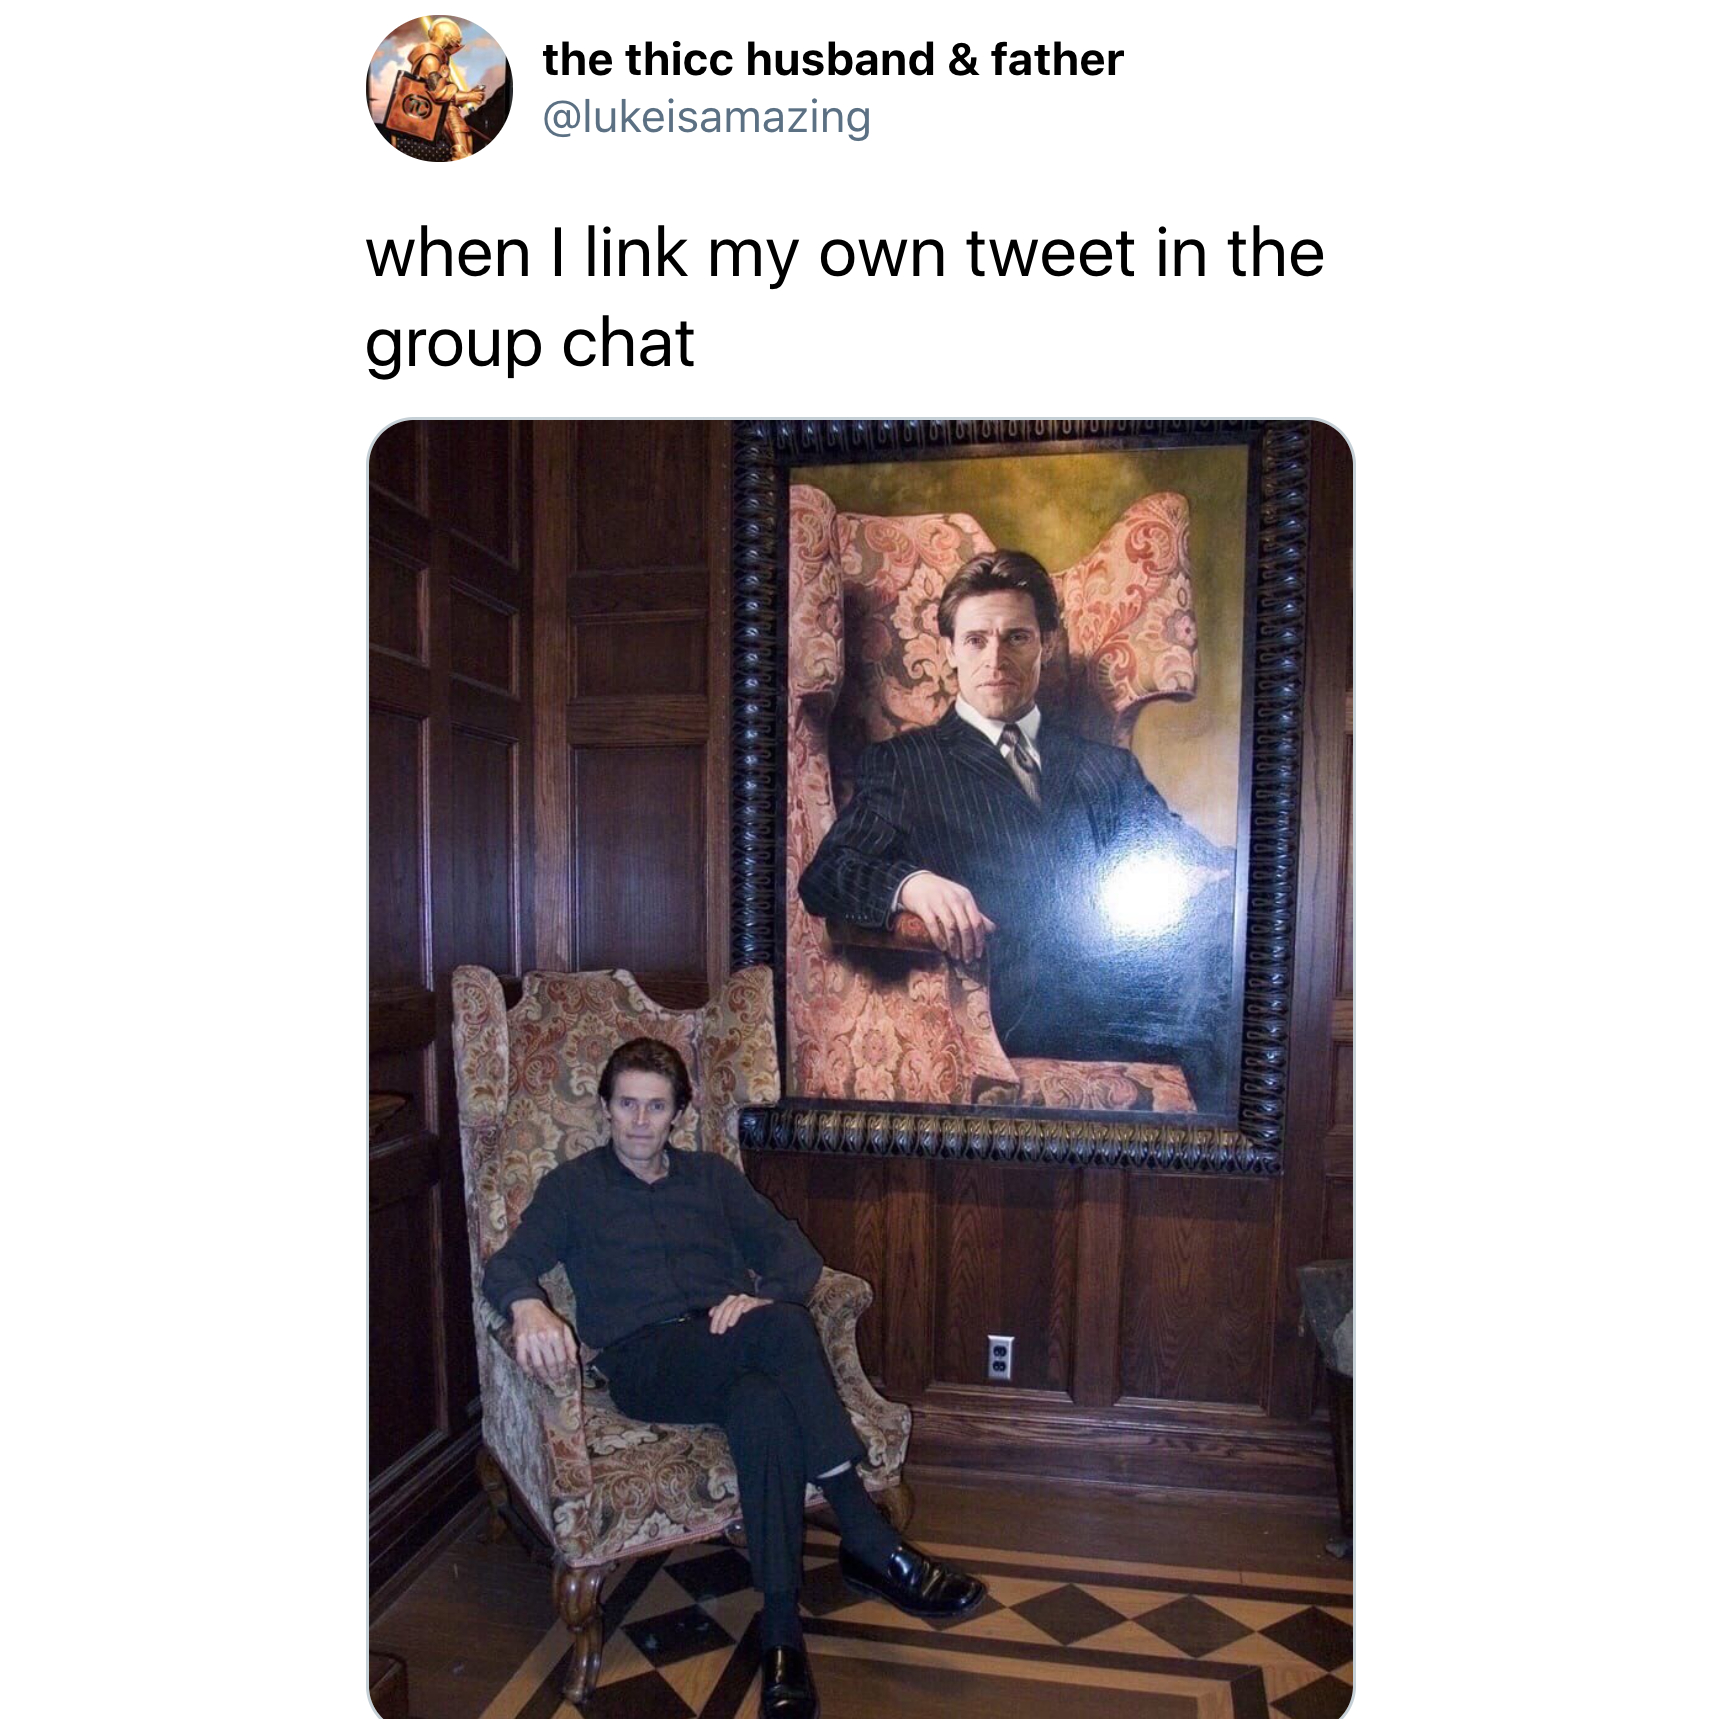 willem dafoe painting meme - the thicc husband & father when I link my own tweet in the group chat